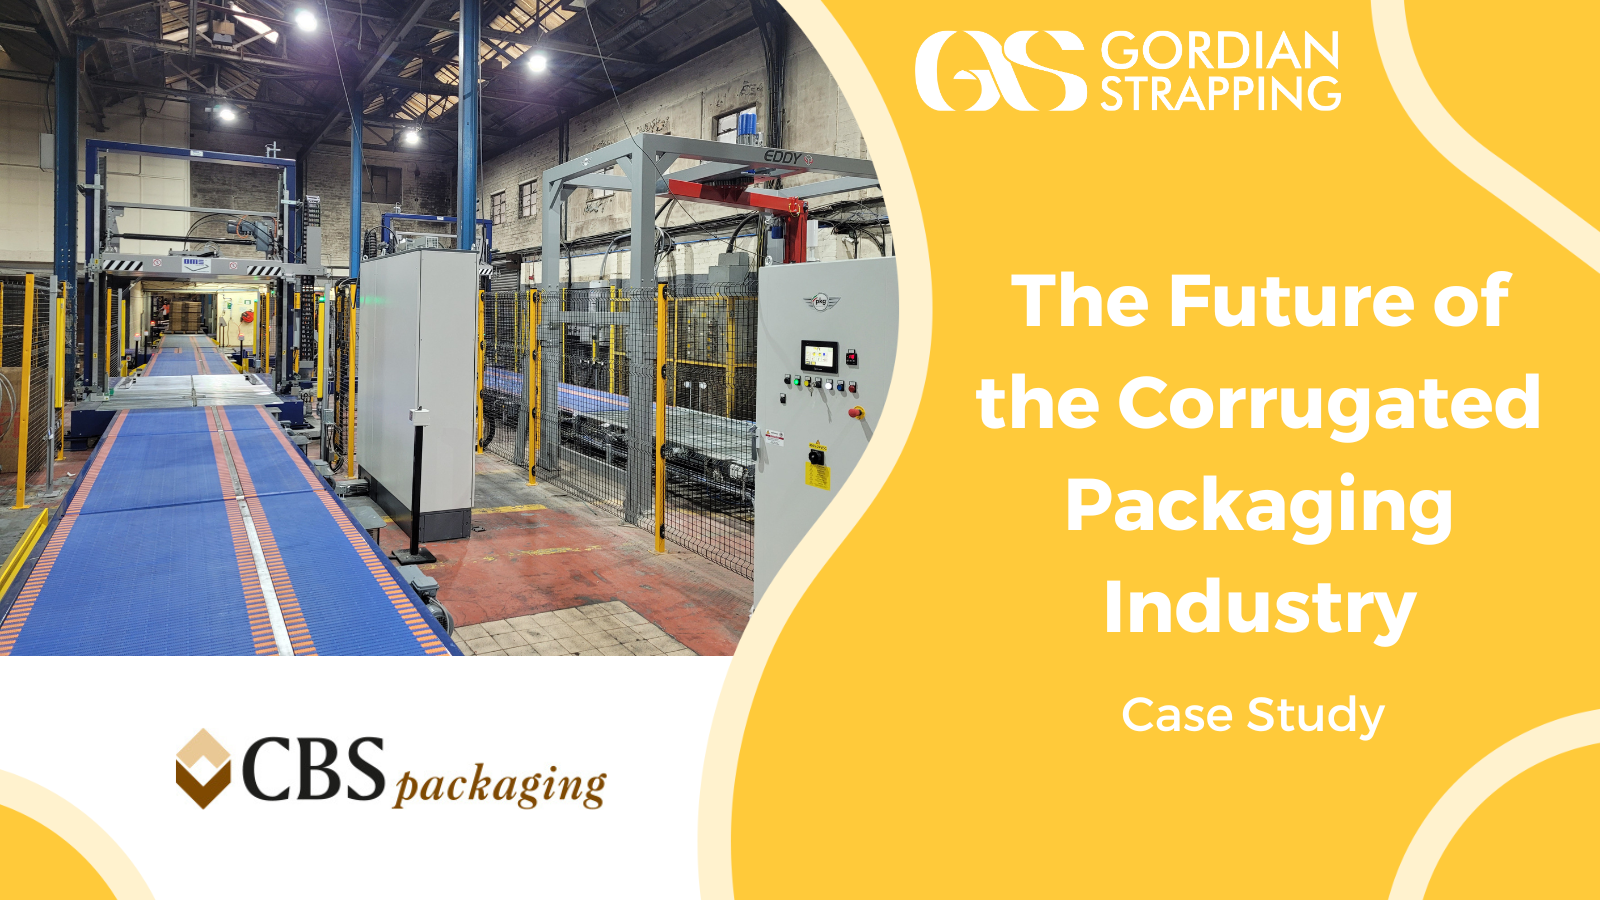 Case Study - The Future of the Corrugated Packaging Industry